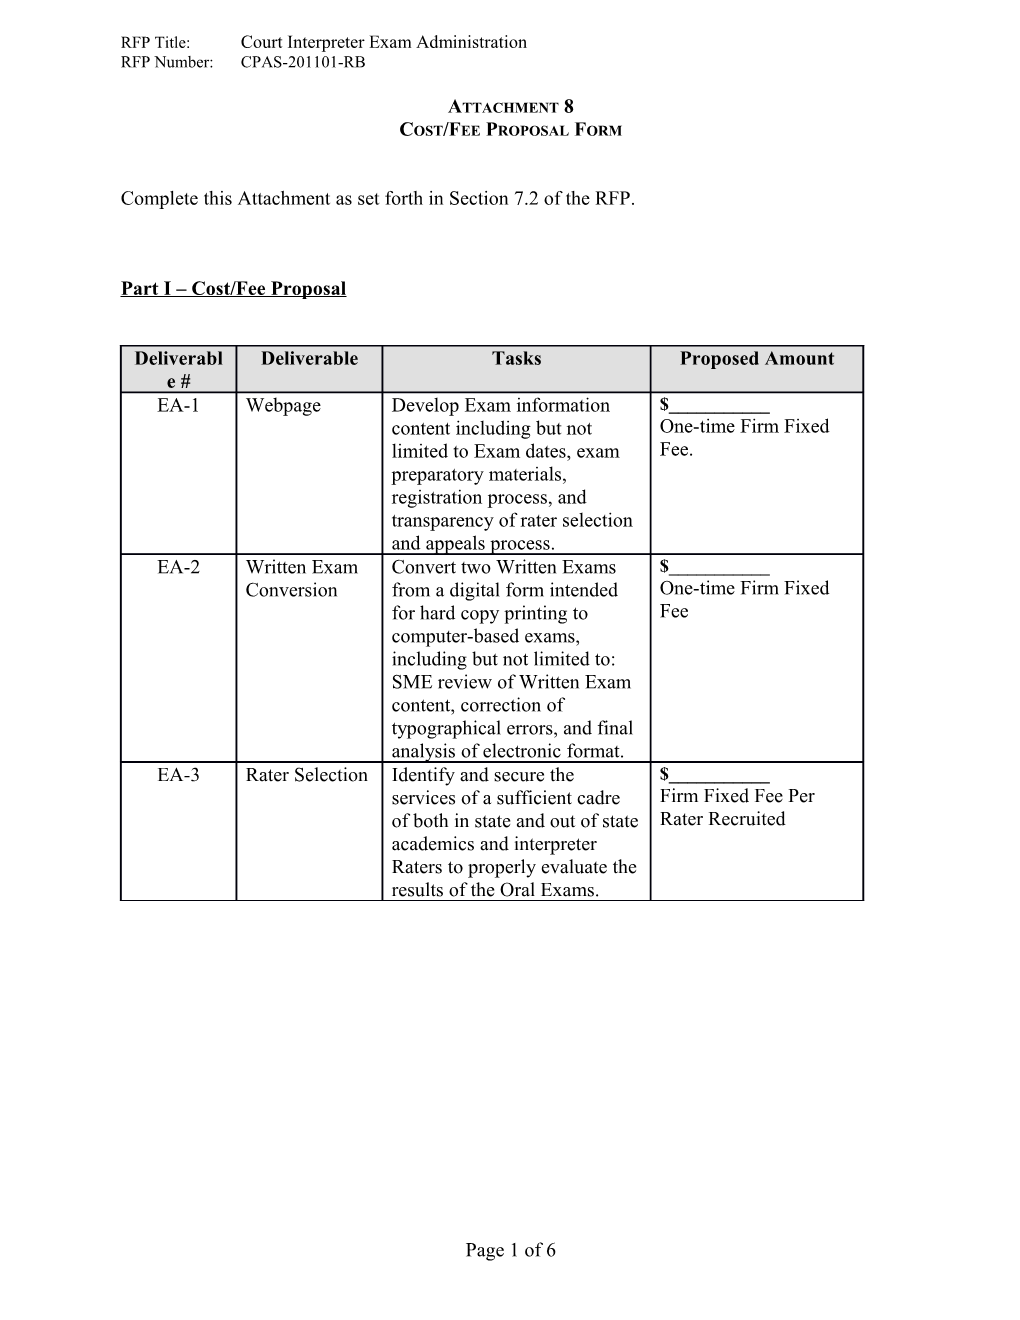 Cost Proposal Table Project A